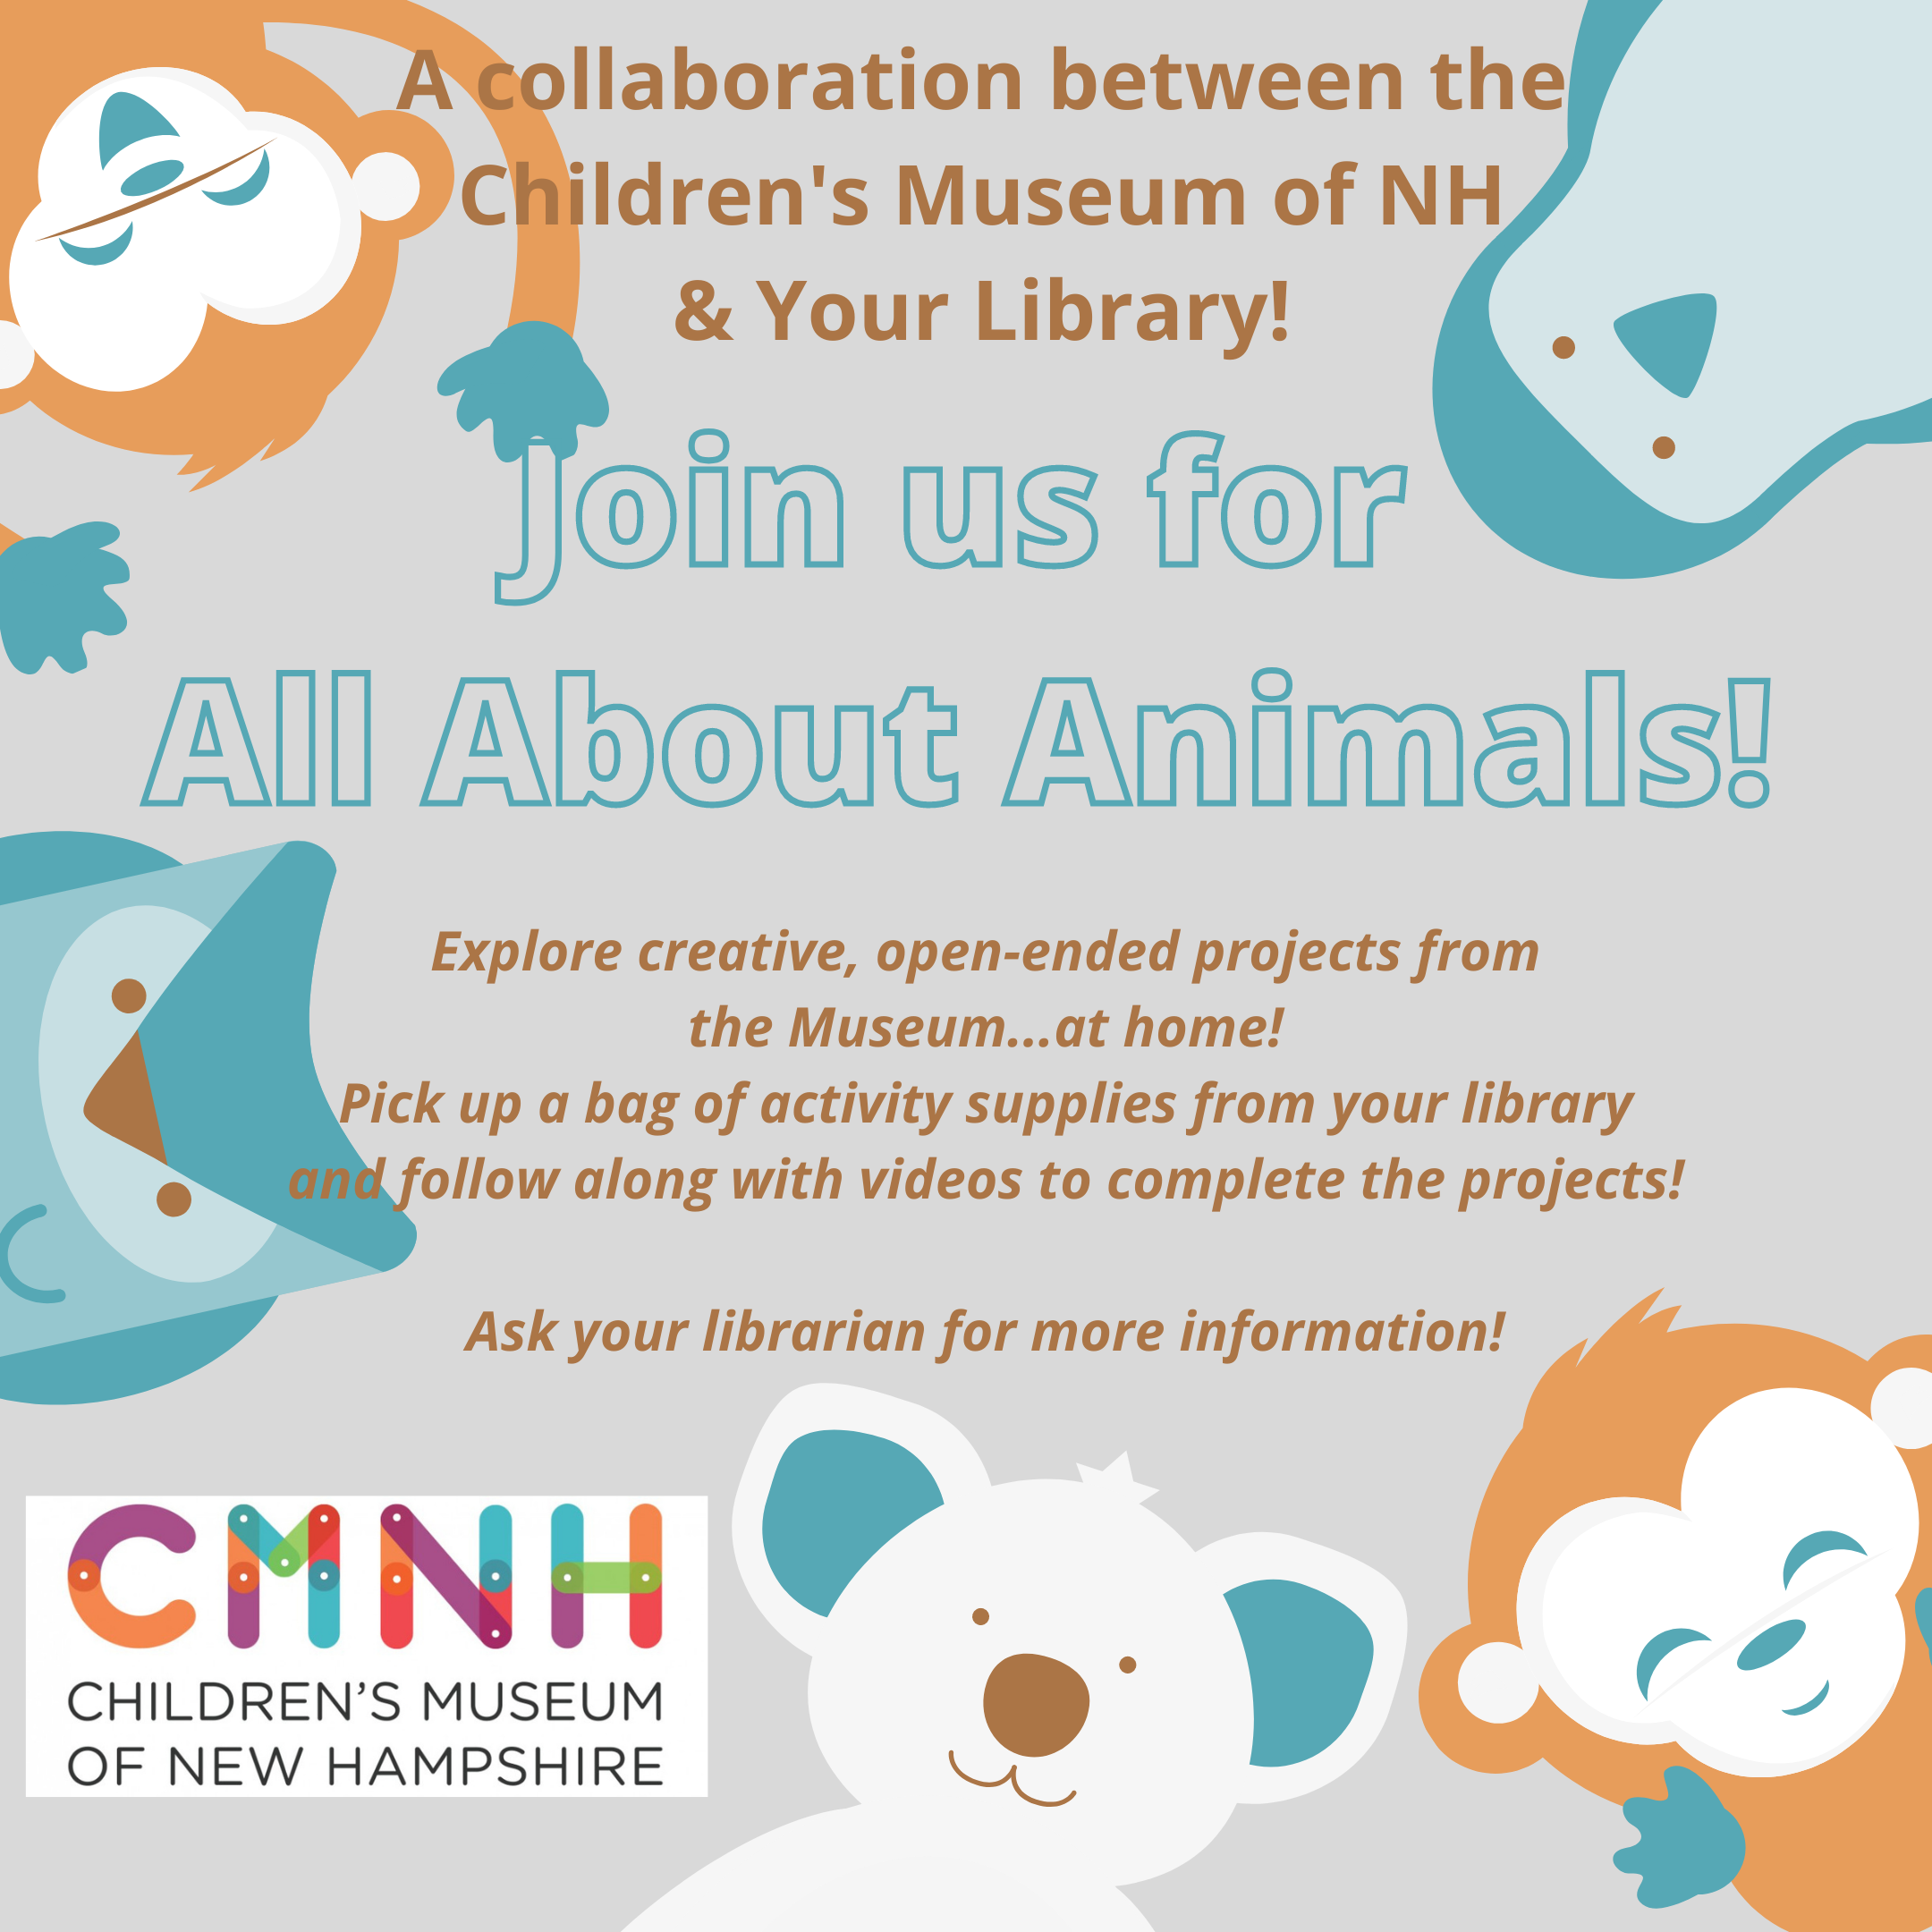 Join us for All About Animals with images of cartoon images of monkeys, a penguin, a koala and an owl around the edges.